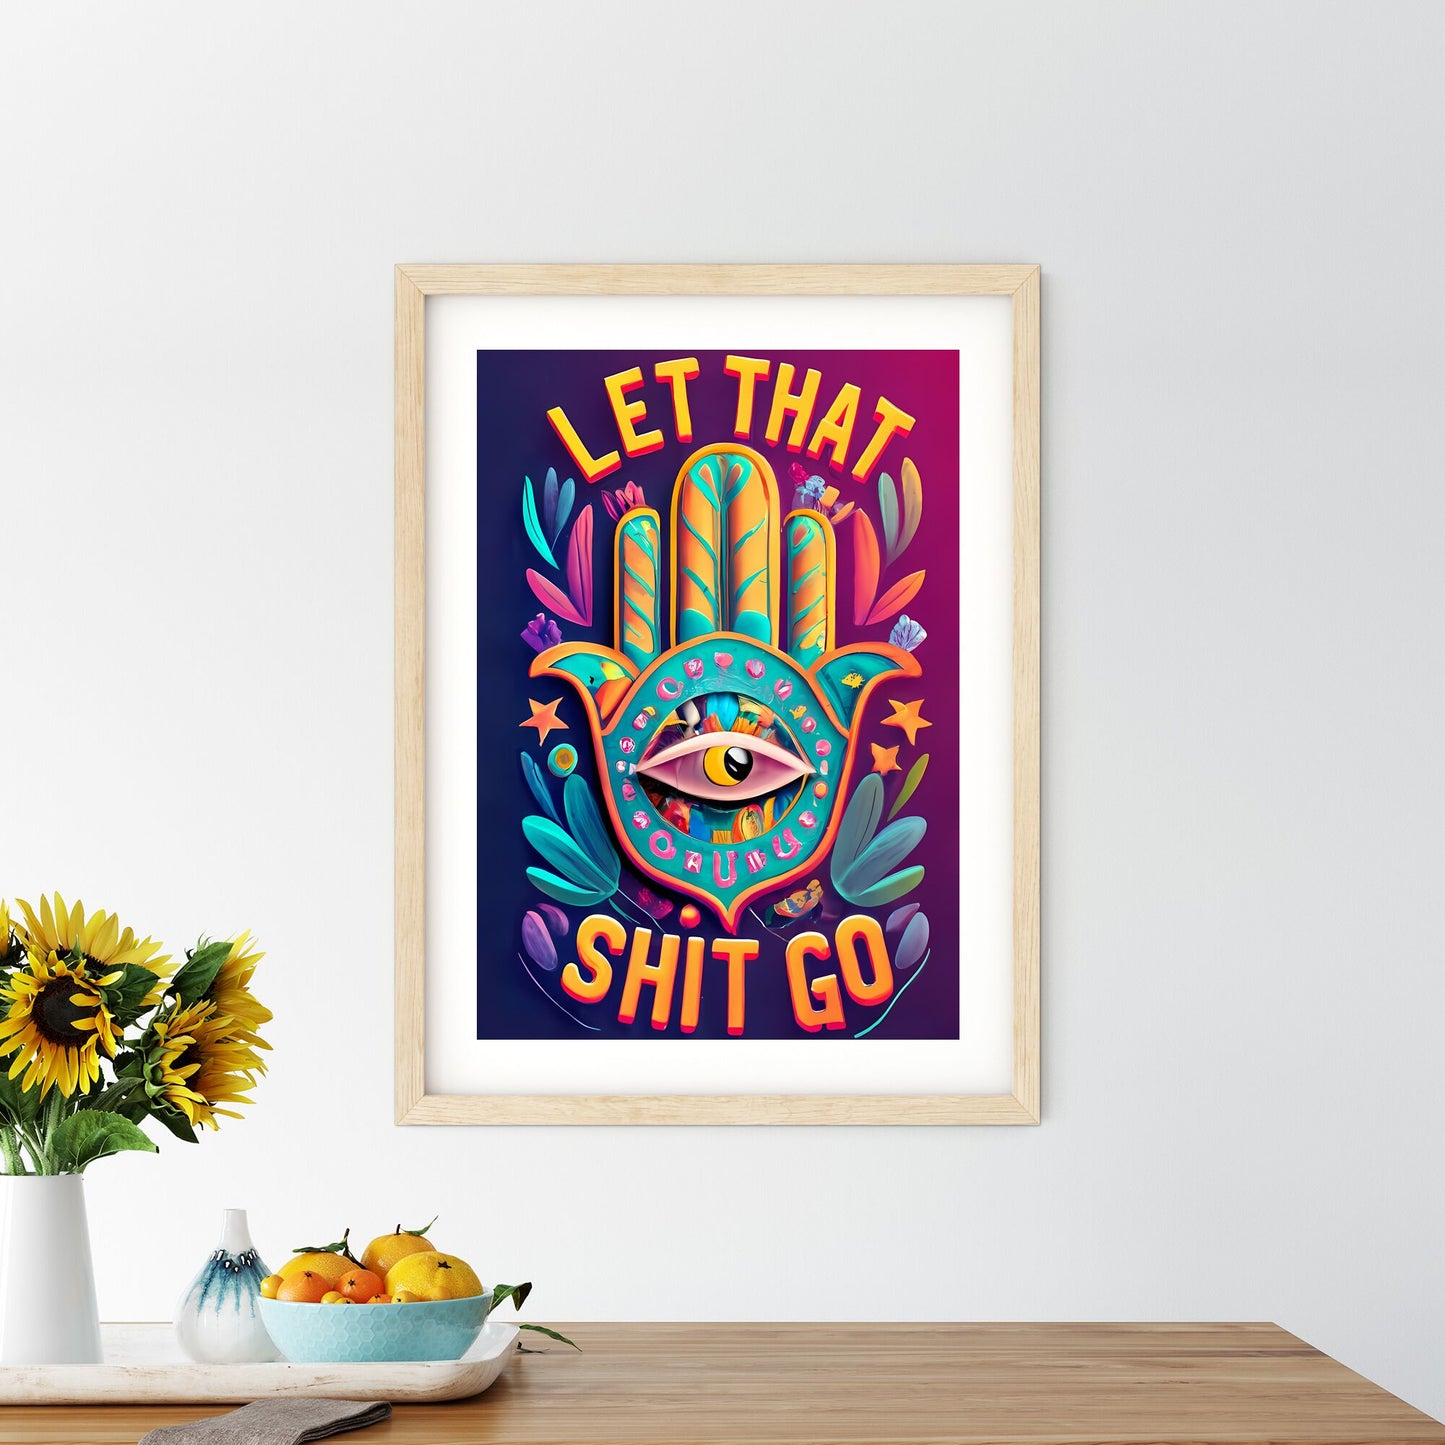 Let That Shit Go - A Colorful Art With An Eye And Leaves Art Print Default Title